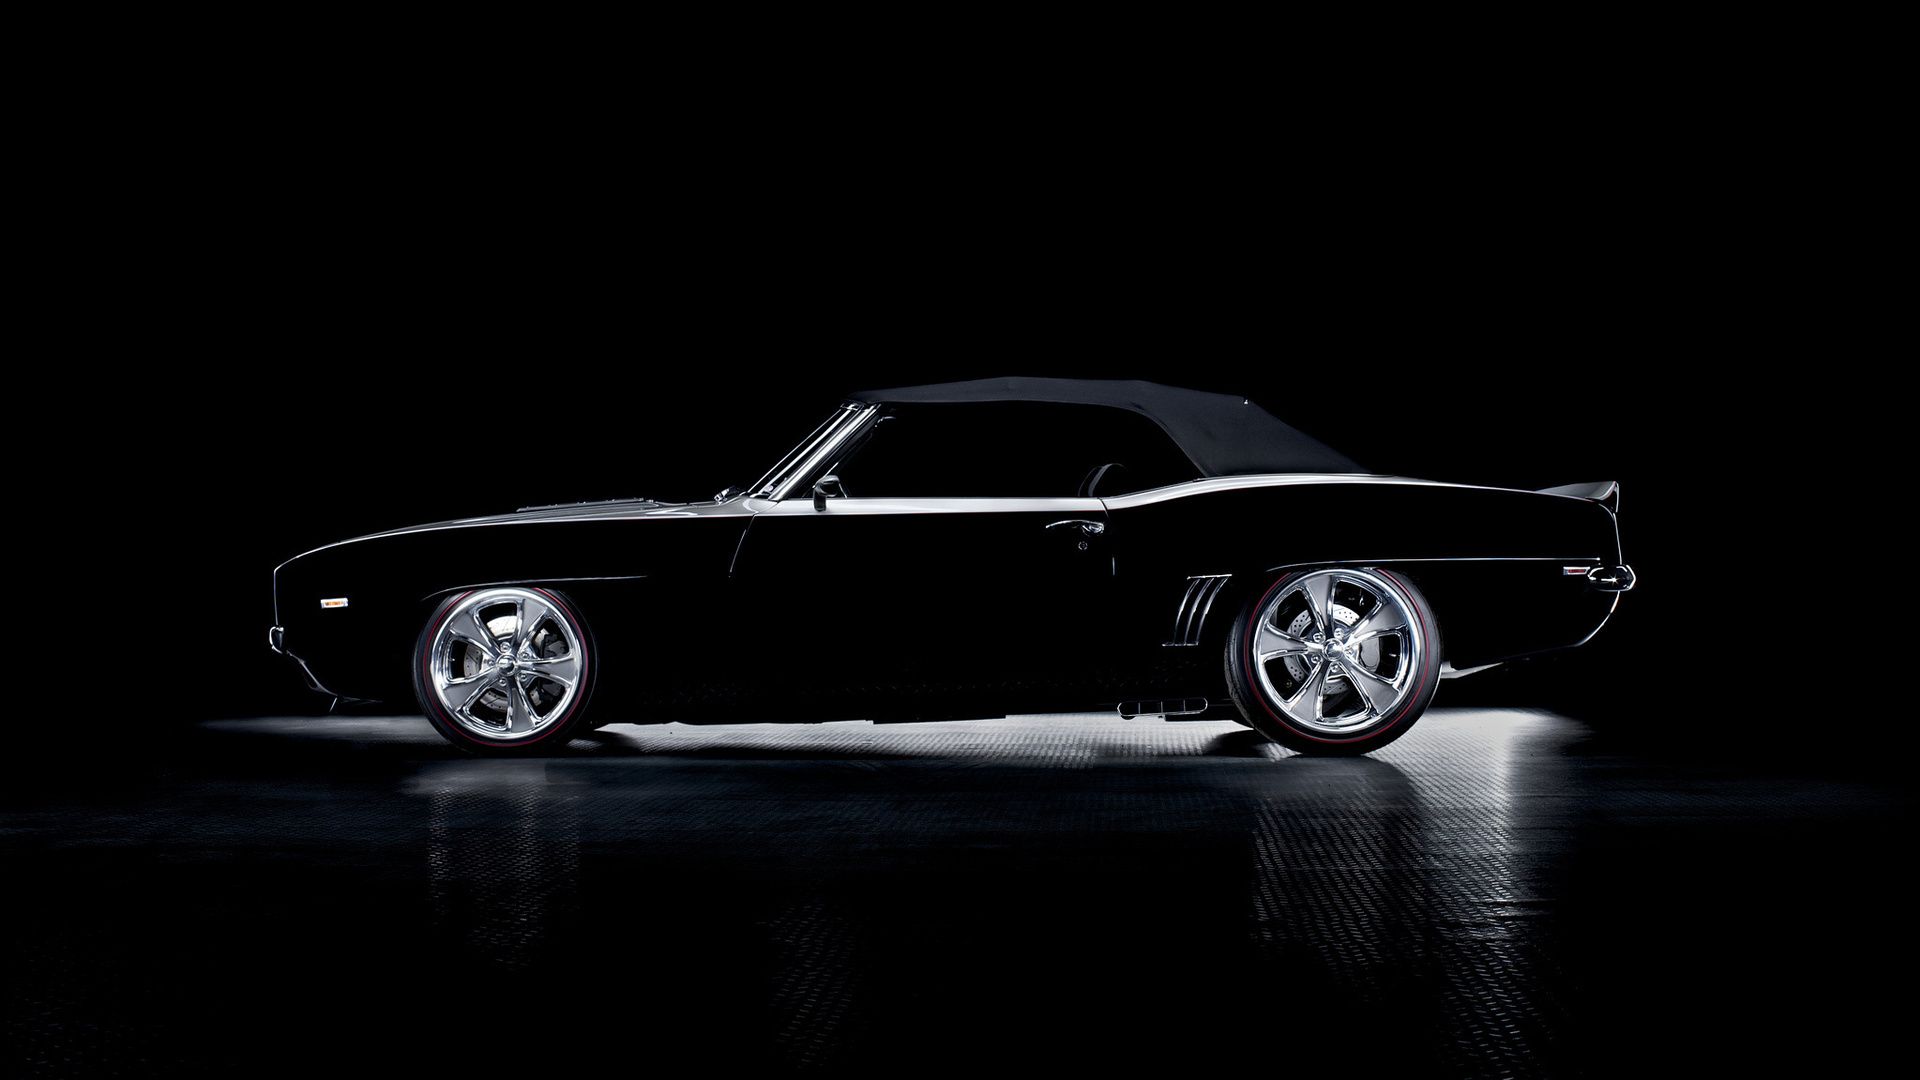 Black Muscle Car Wallpapers